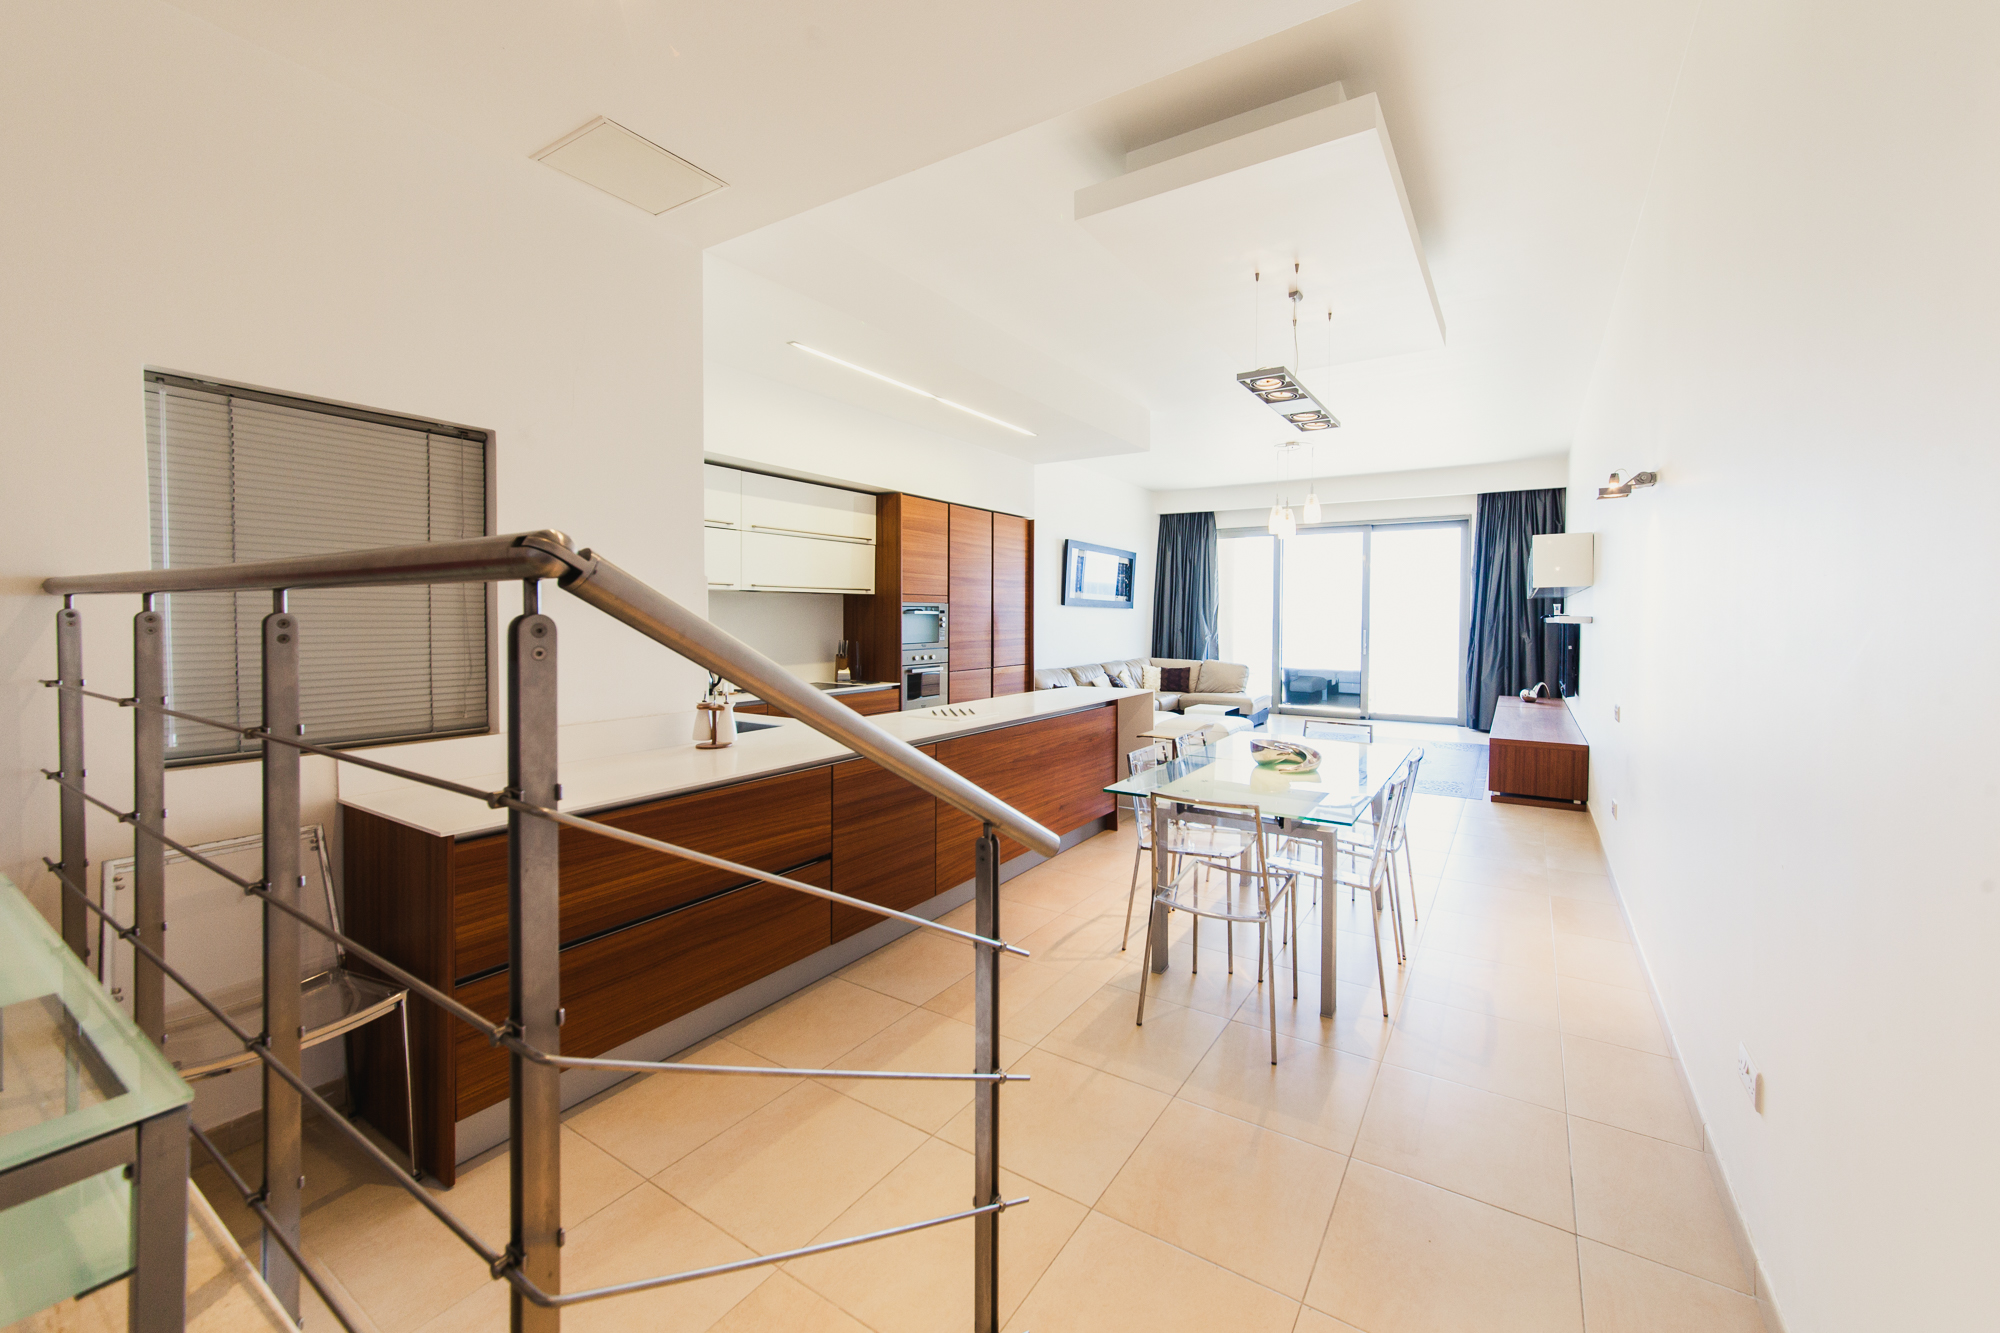 Qui-Si-Sana, Sliema – A Spacious Modern Seafront 3 Bedroom Apartment for Rent